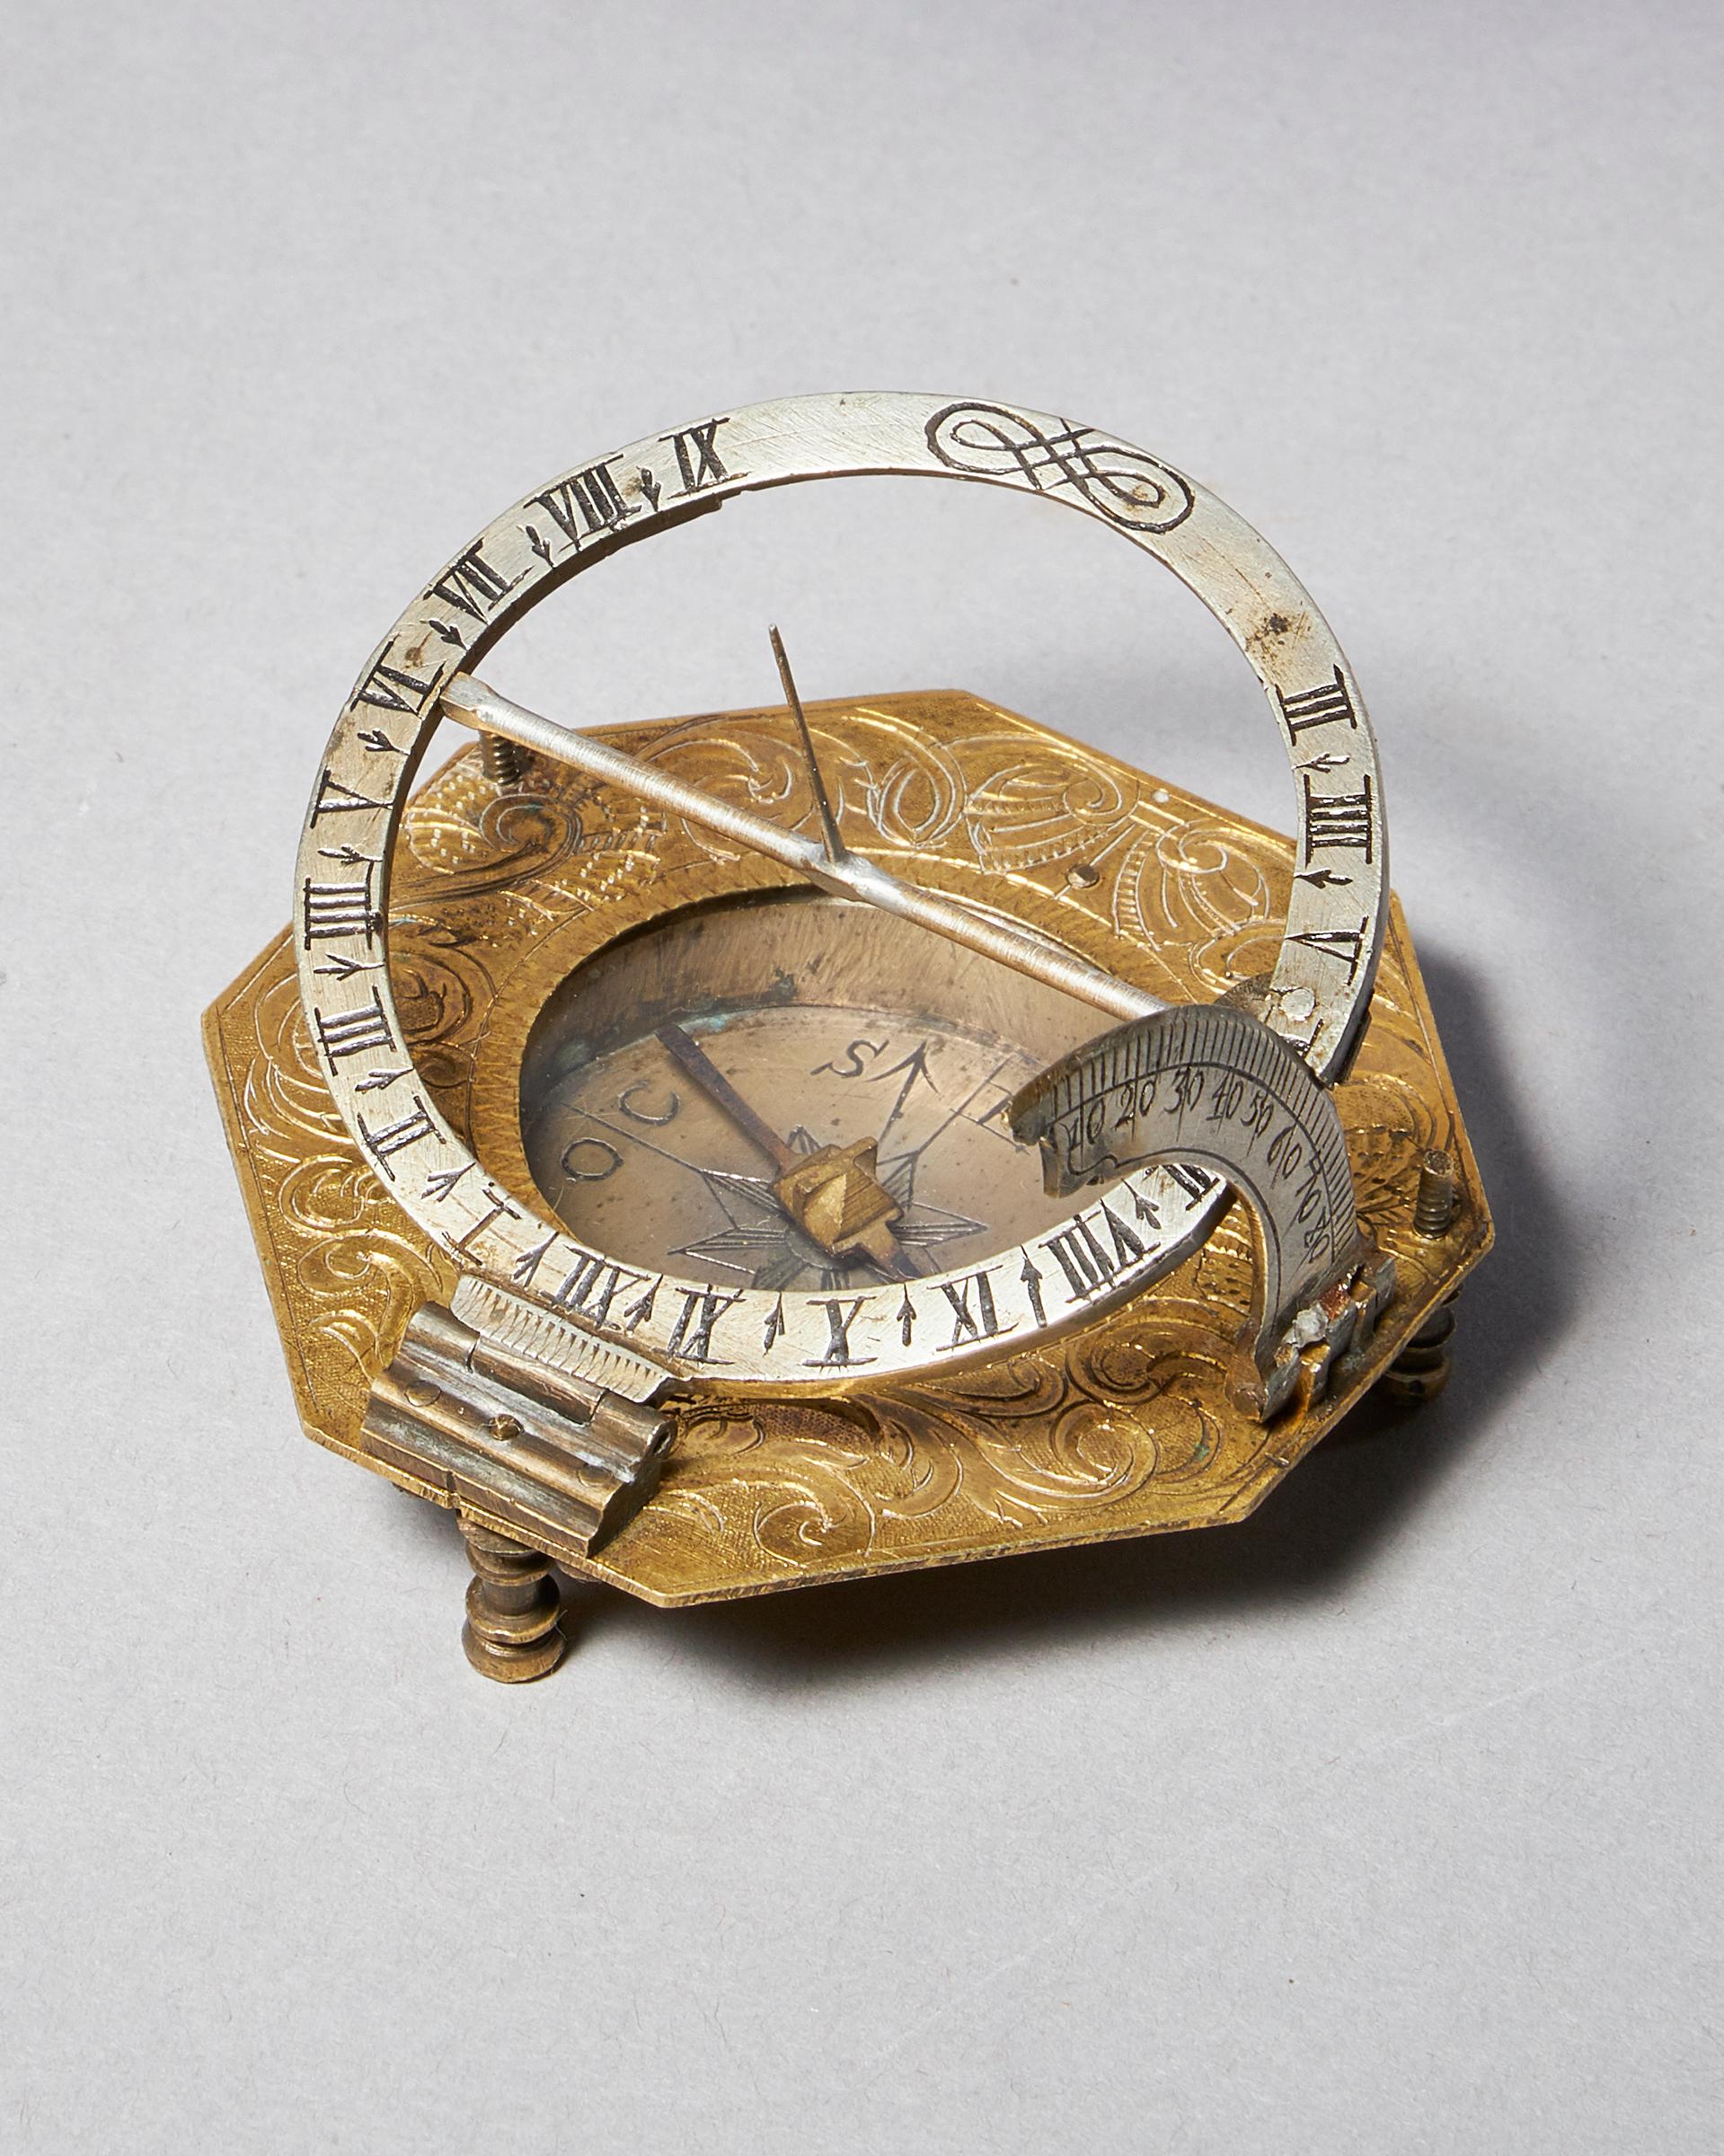 Engraved 18th Century German Equinoctial Pocket Sundial and Compass by Ludwig Theodor